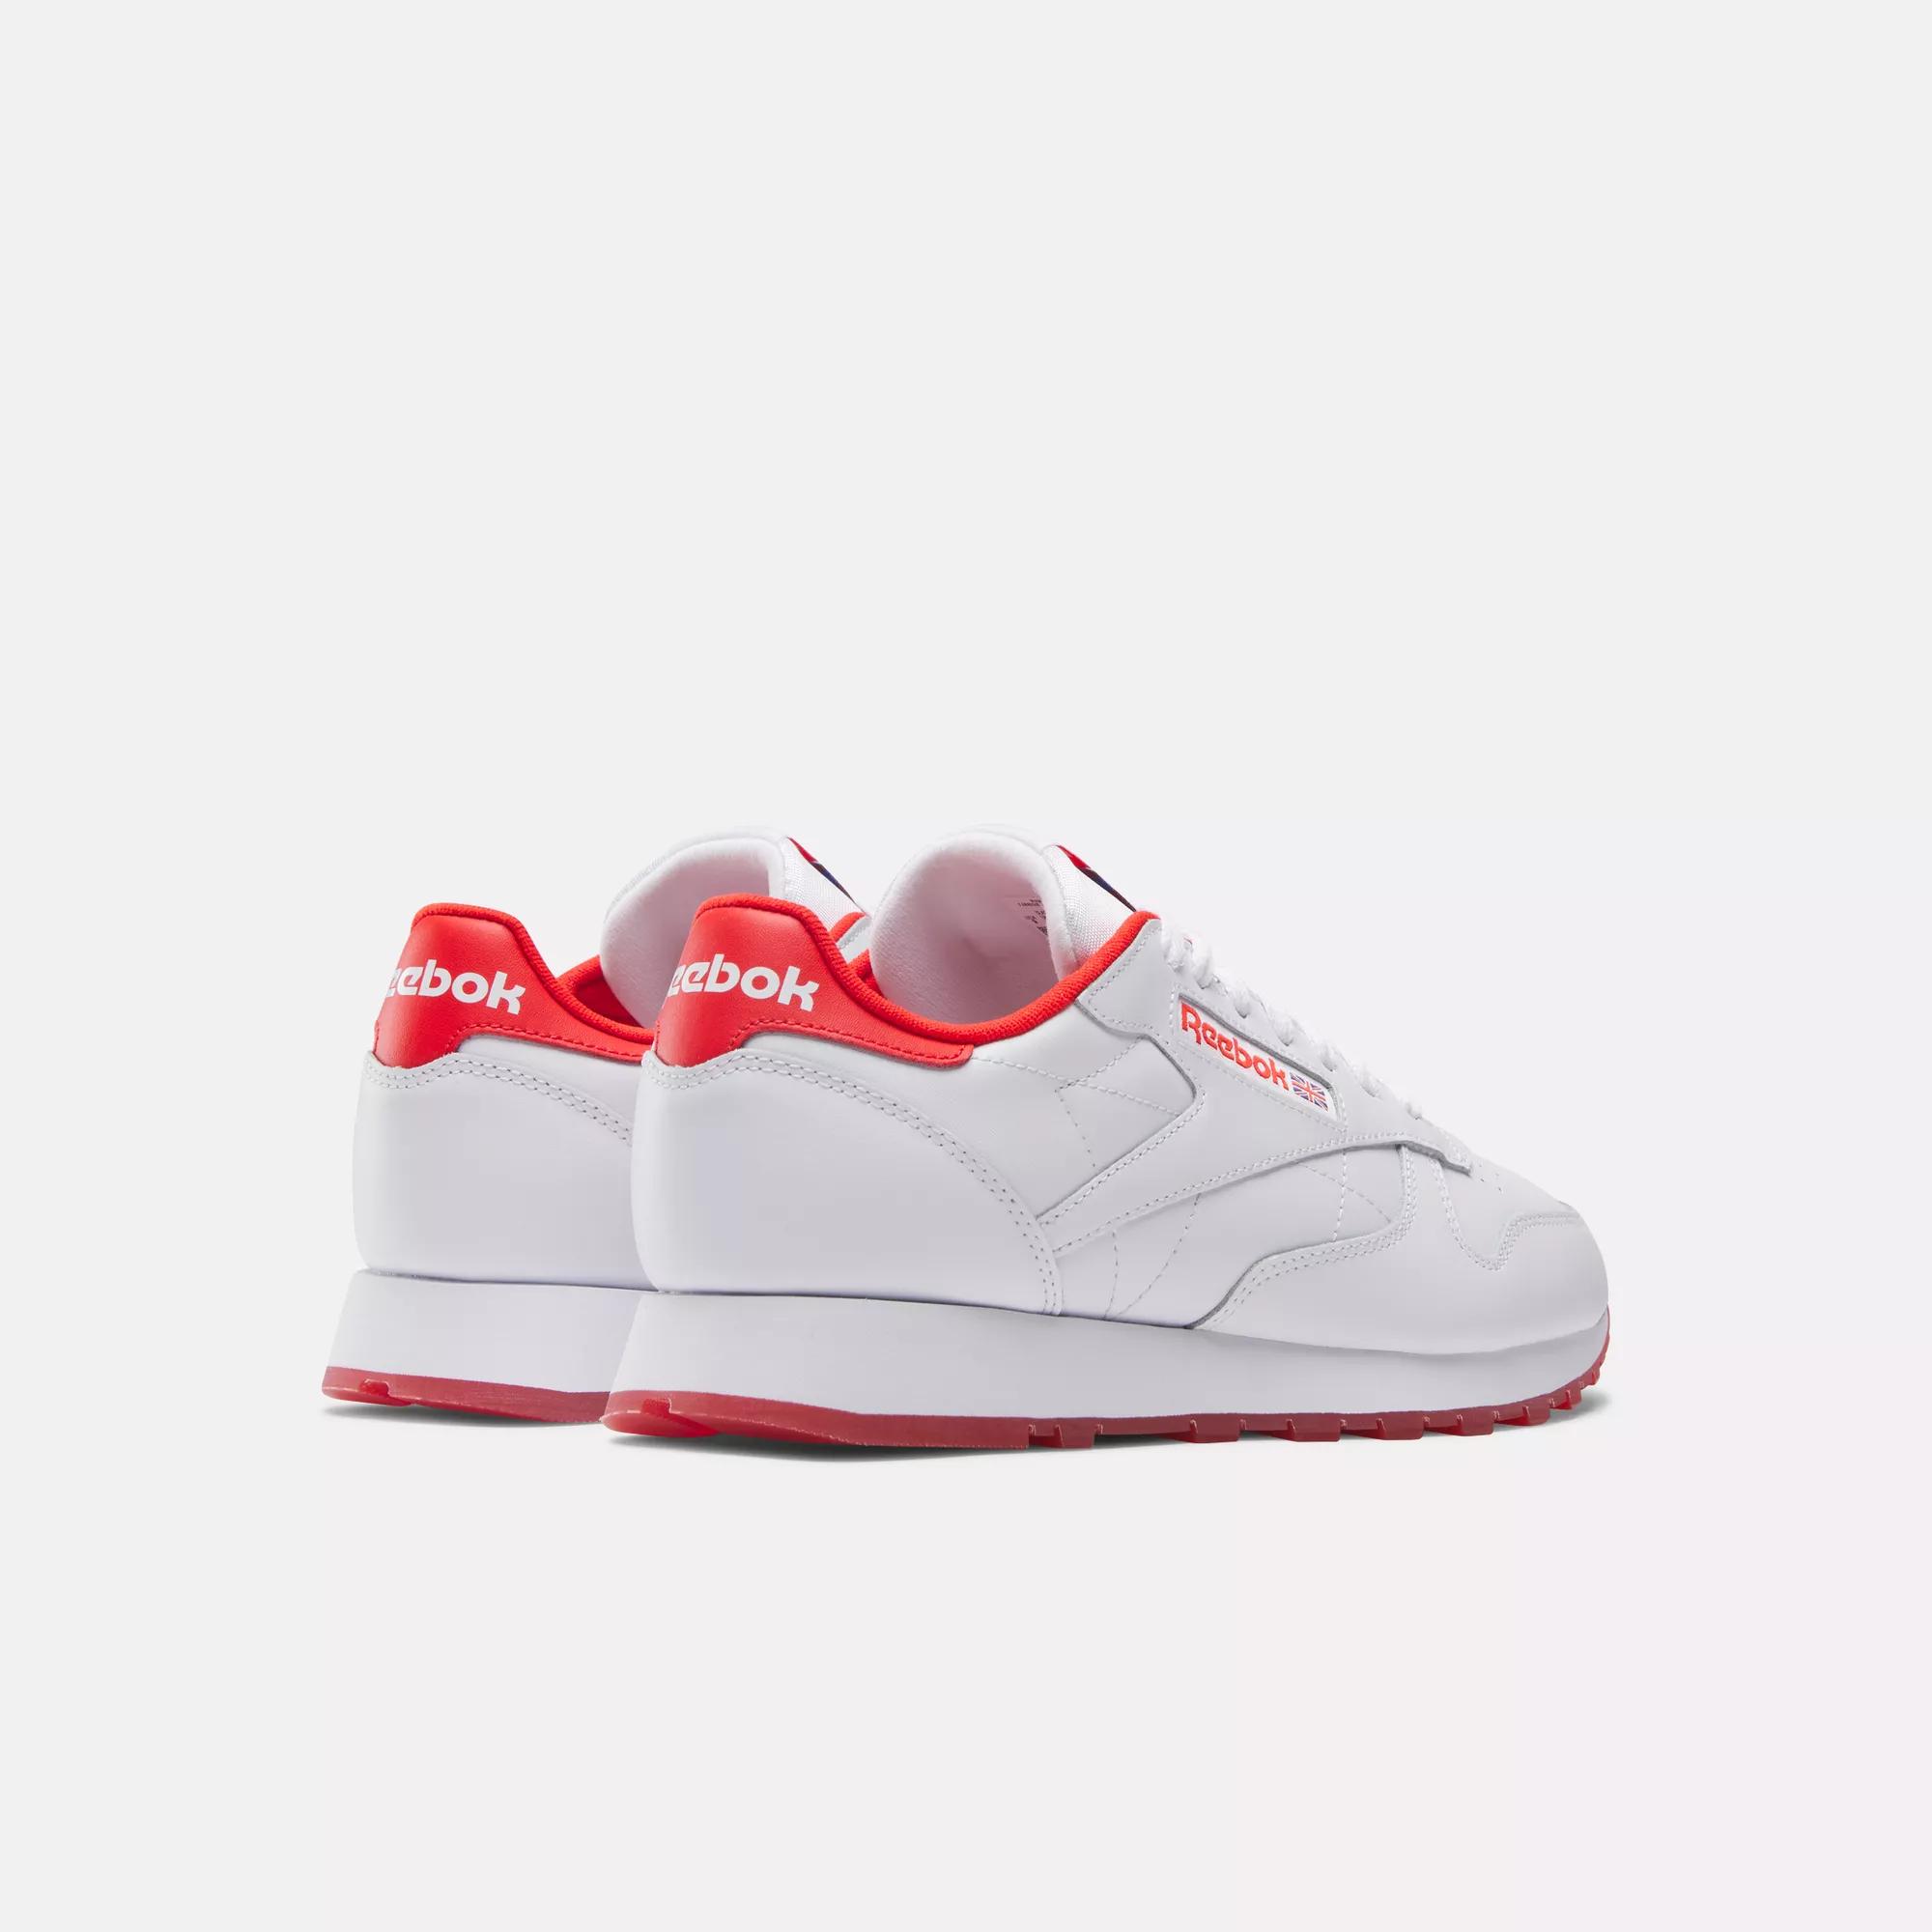 Classic Leather / | Ice Shoes White Instinct Red Reebok - / White